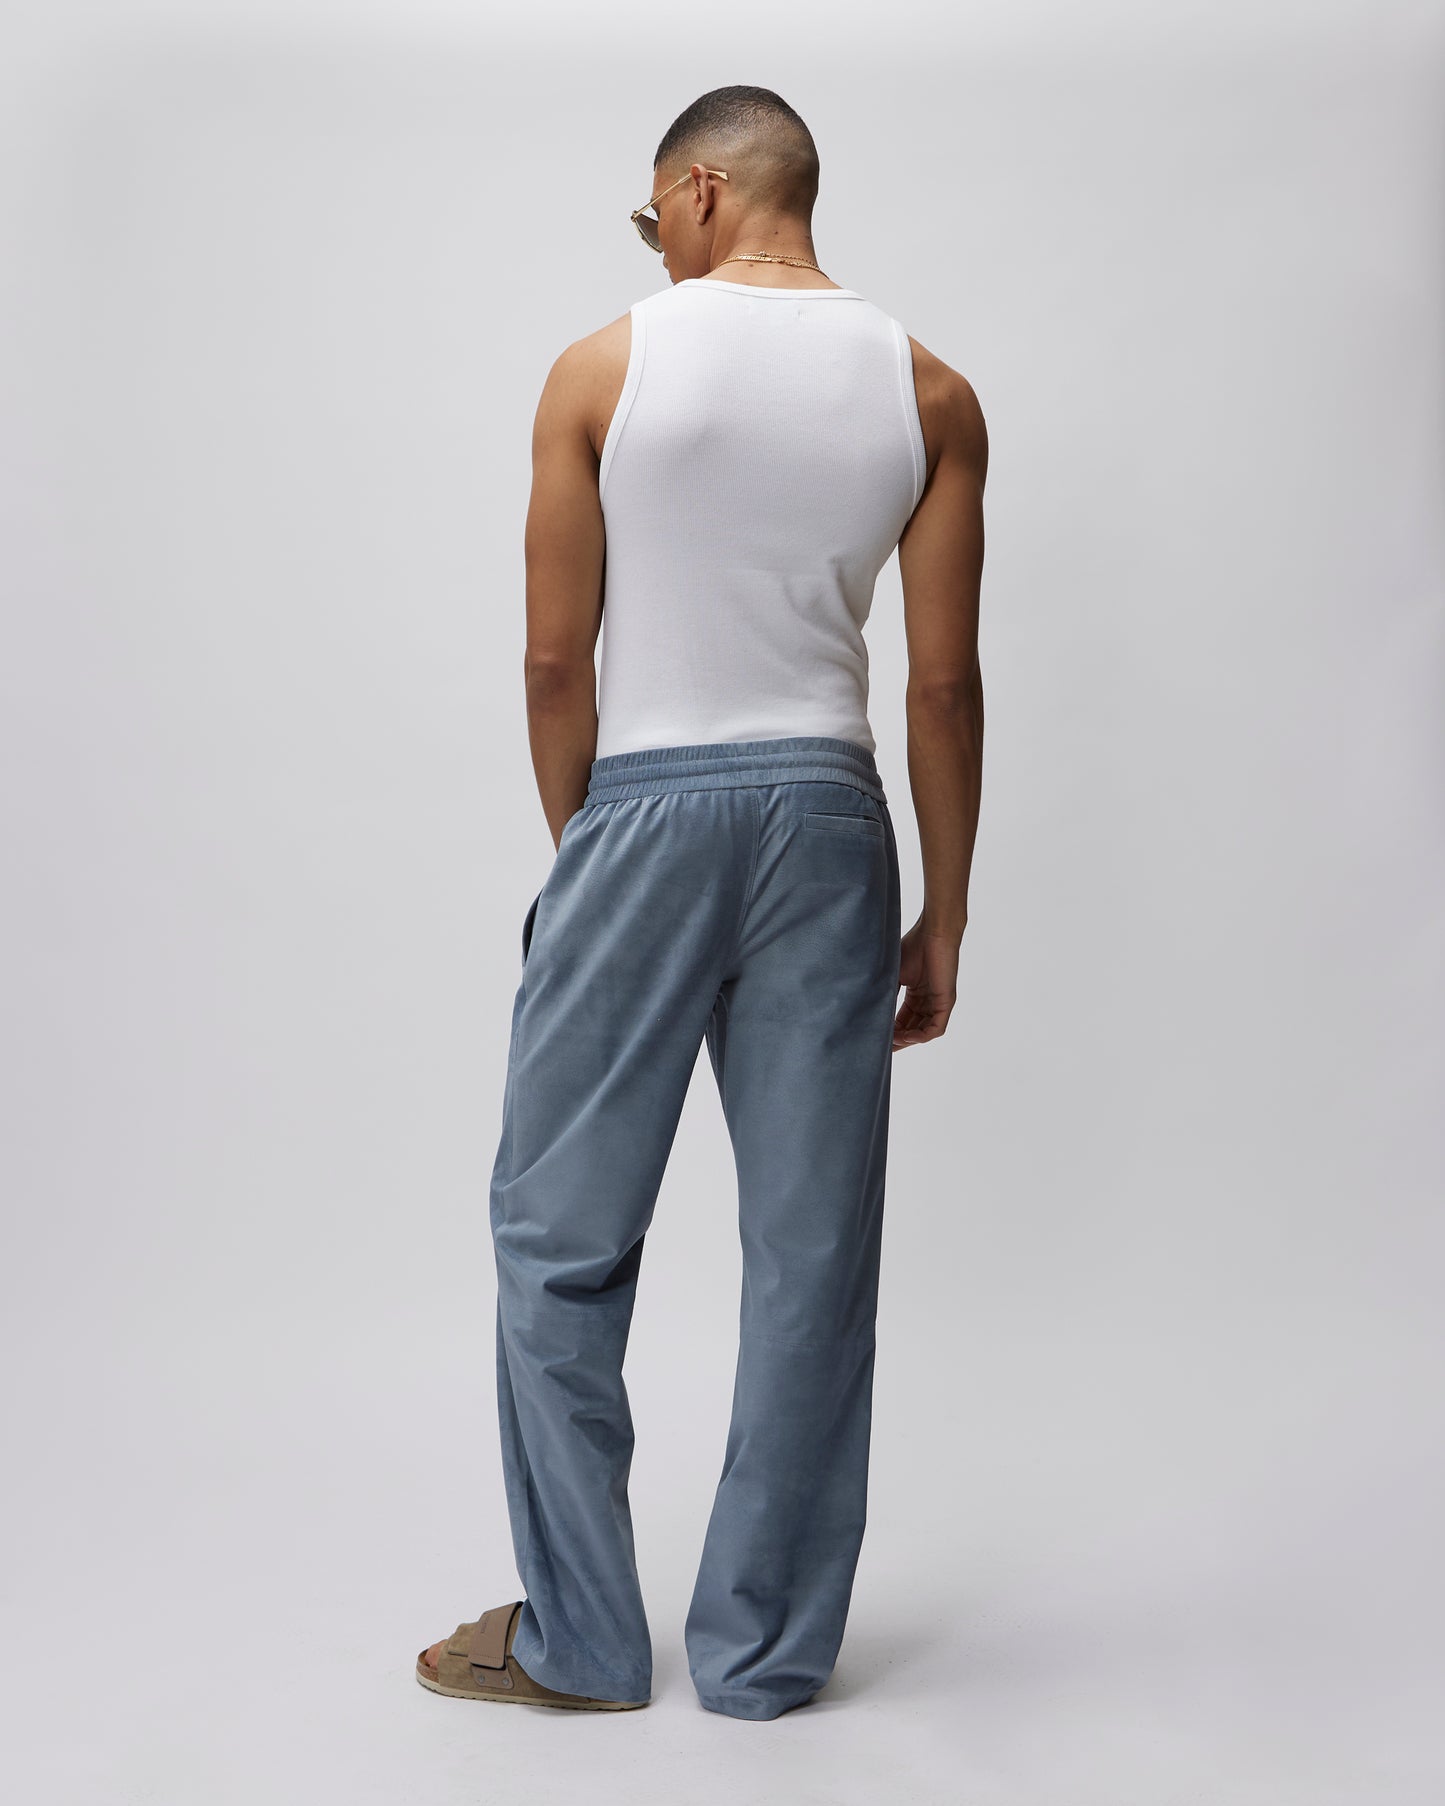 SUEDE TROUSERS - Due Diligence Apparel